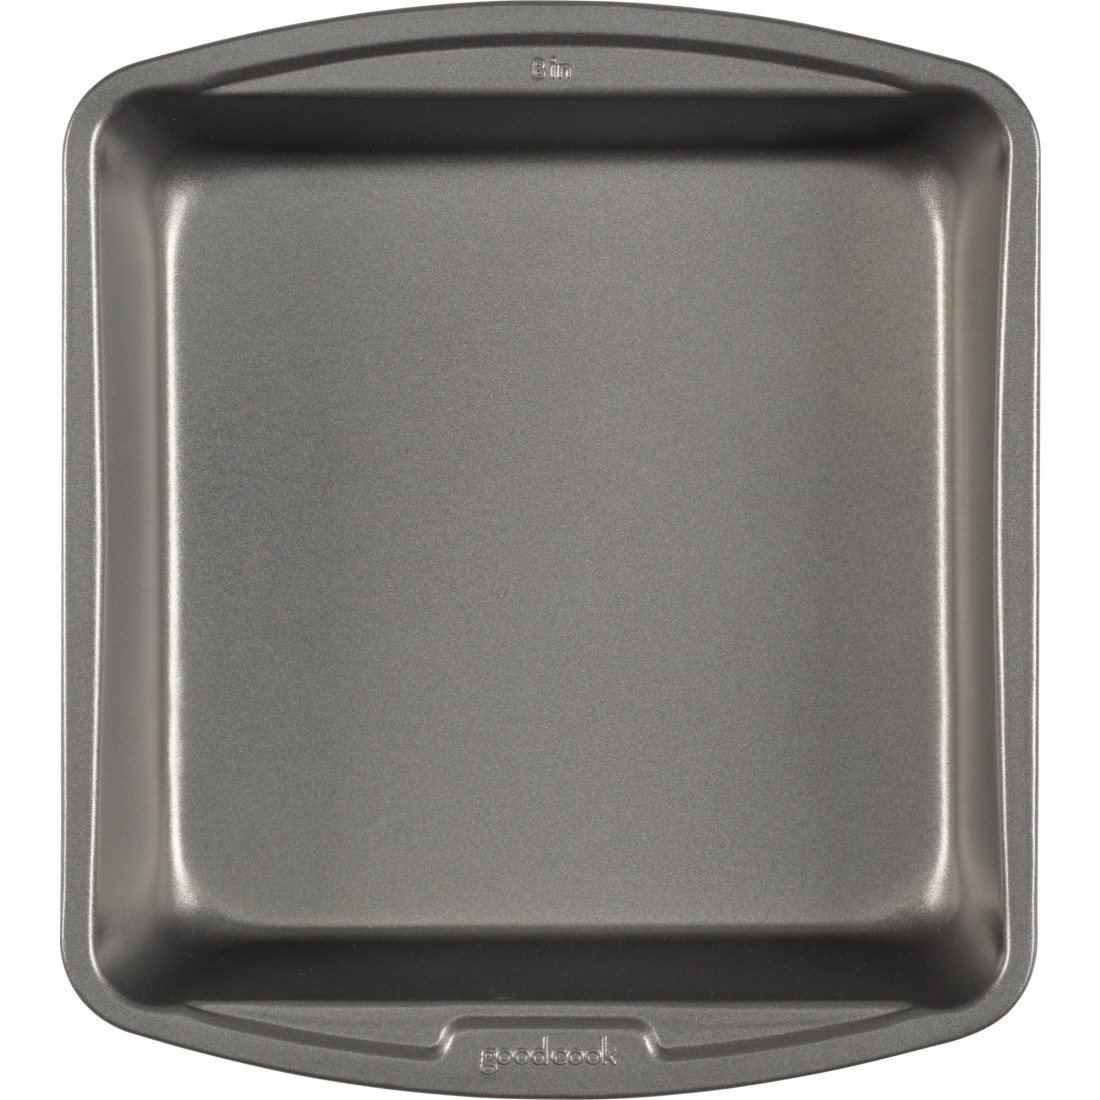  Good Cook 04017 786173391991 8 Inch x 8 Inch Square Cake Pan, 8  x 8 Inch, Grey: Home & Kitchen